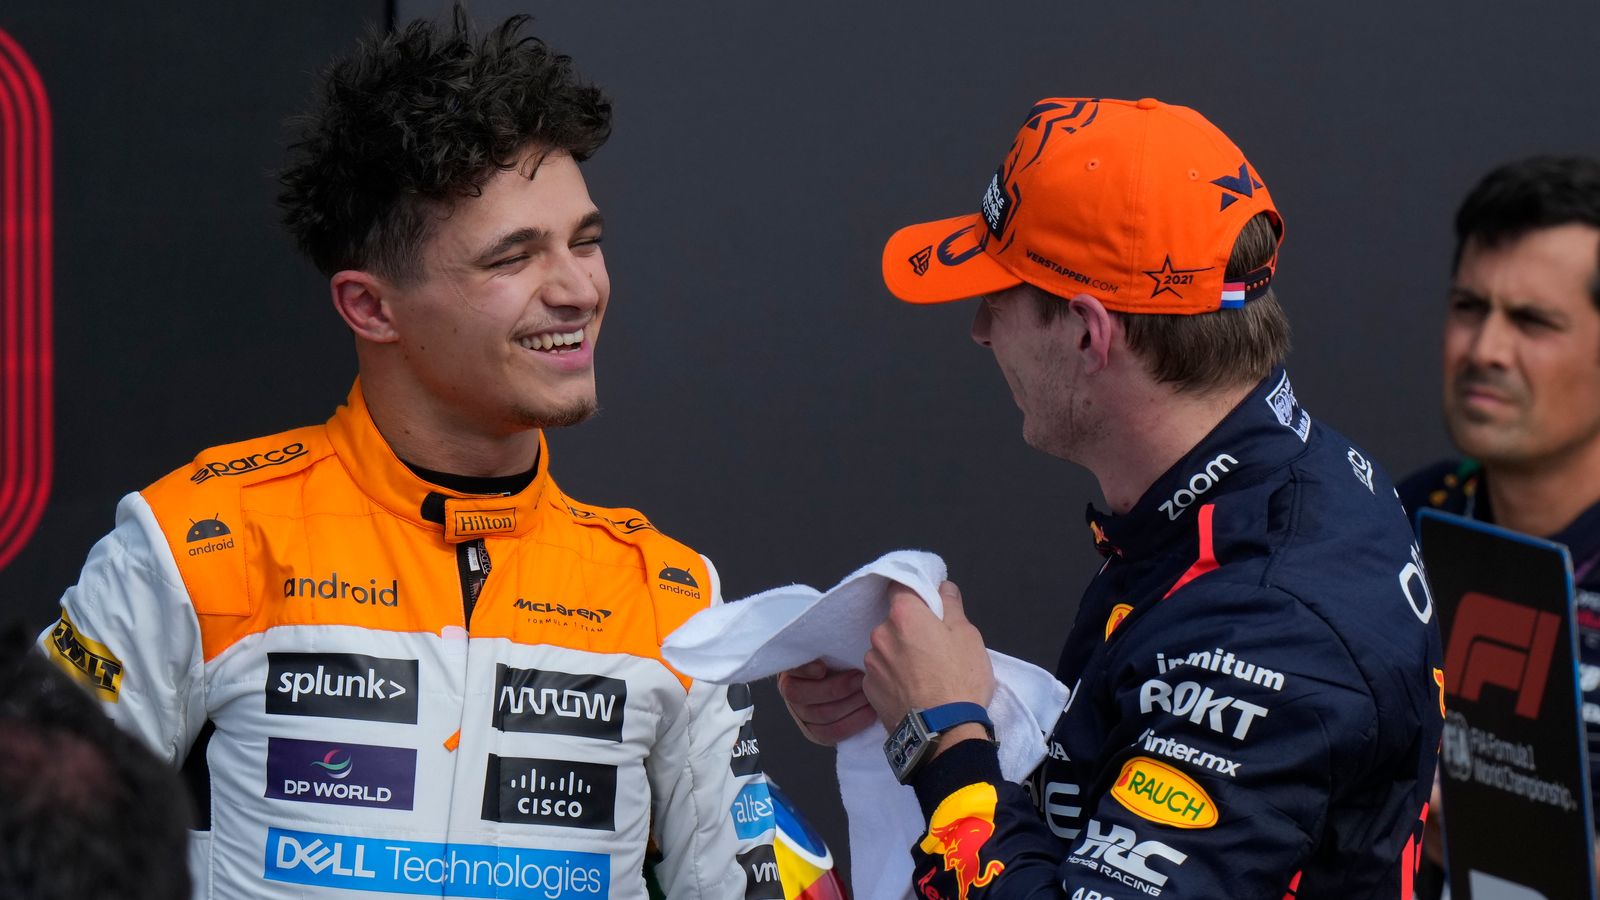 British GP: Lando Norris says it is ‘fairly insane’ to be so near taking pole and jokes Max Verstappen ‘ruins every little thing’